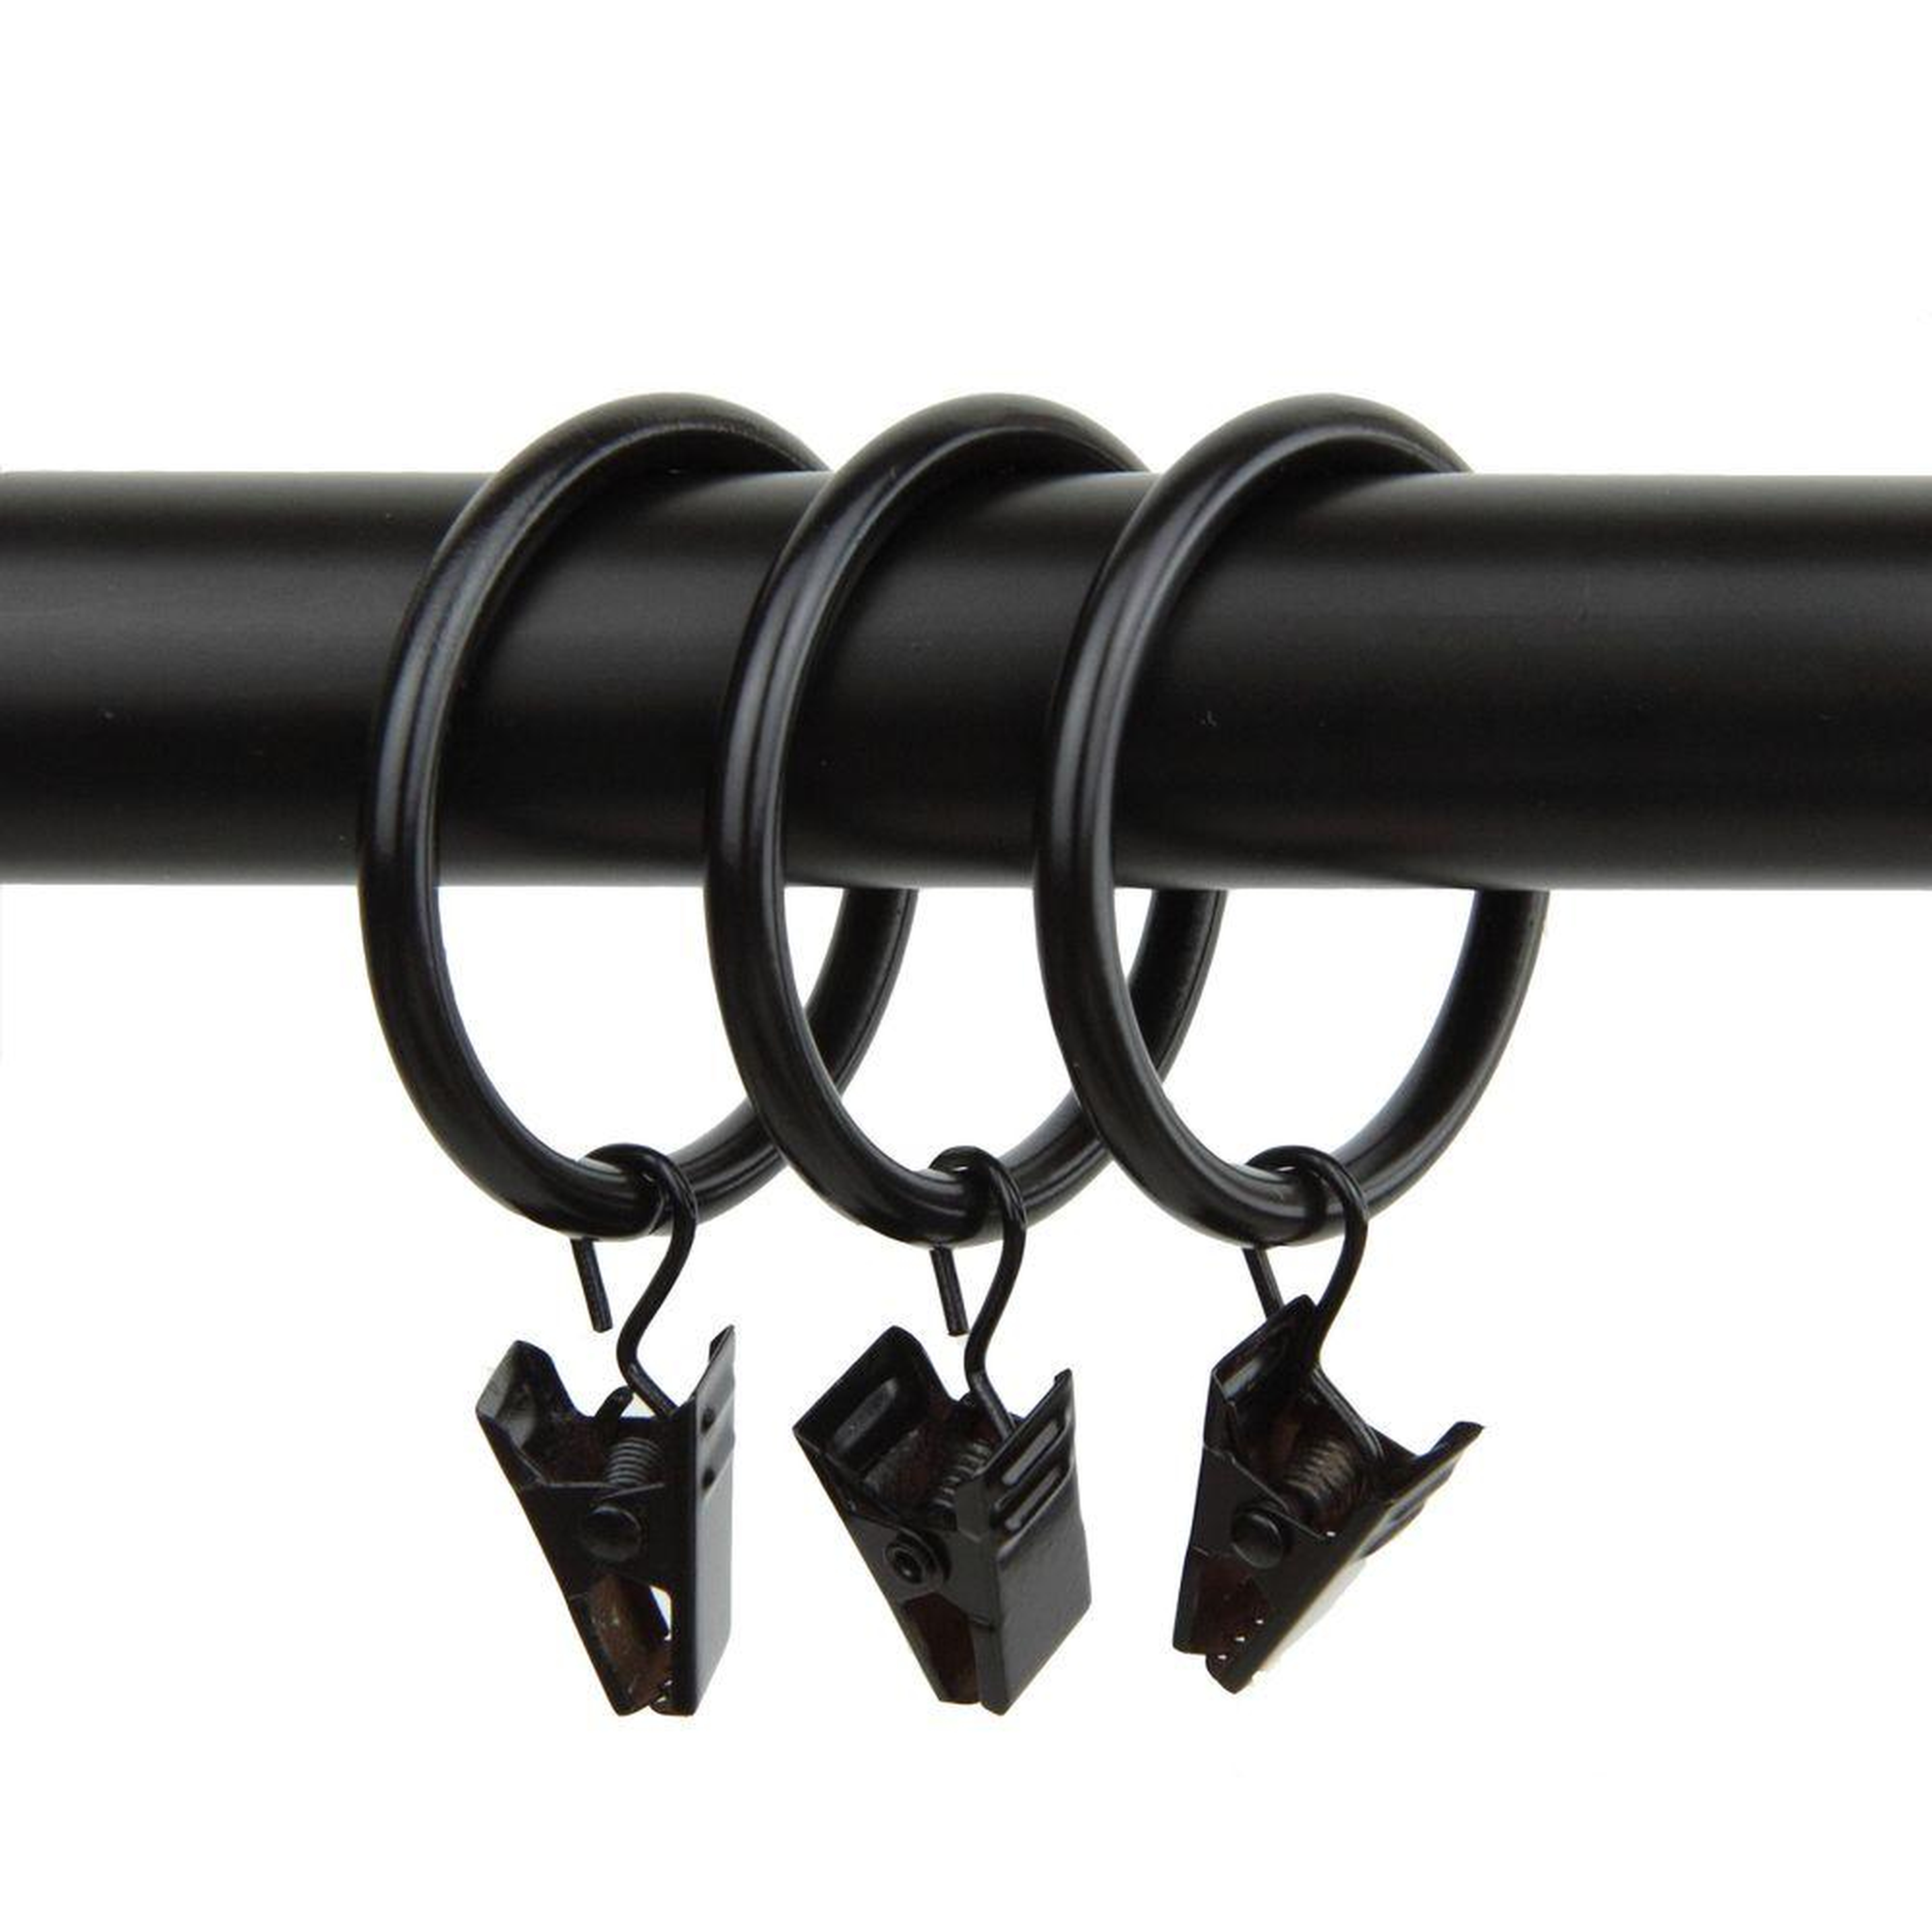 Rod Desyne 1-3/8" Decorative Rings in Black with Clips (Set of 10) - Home Depot